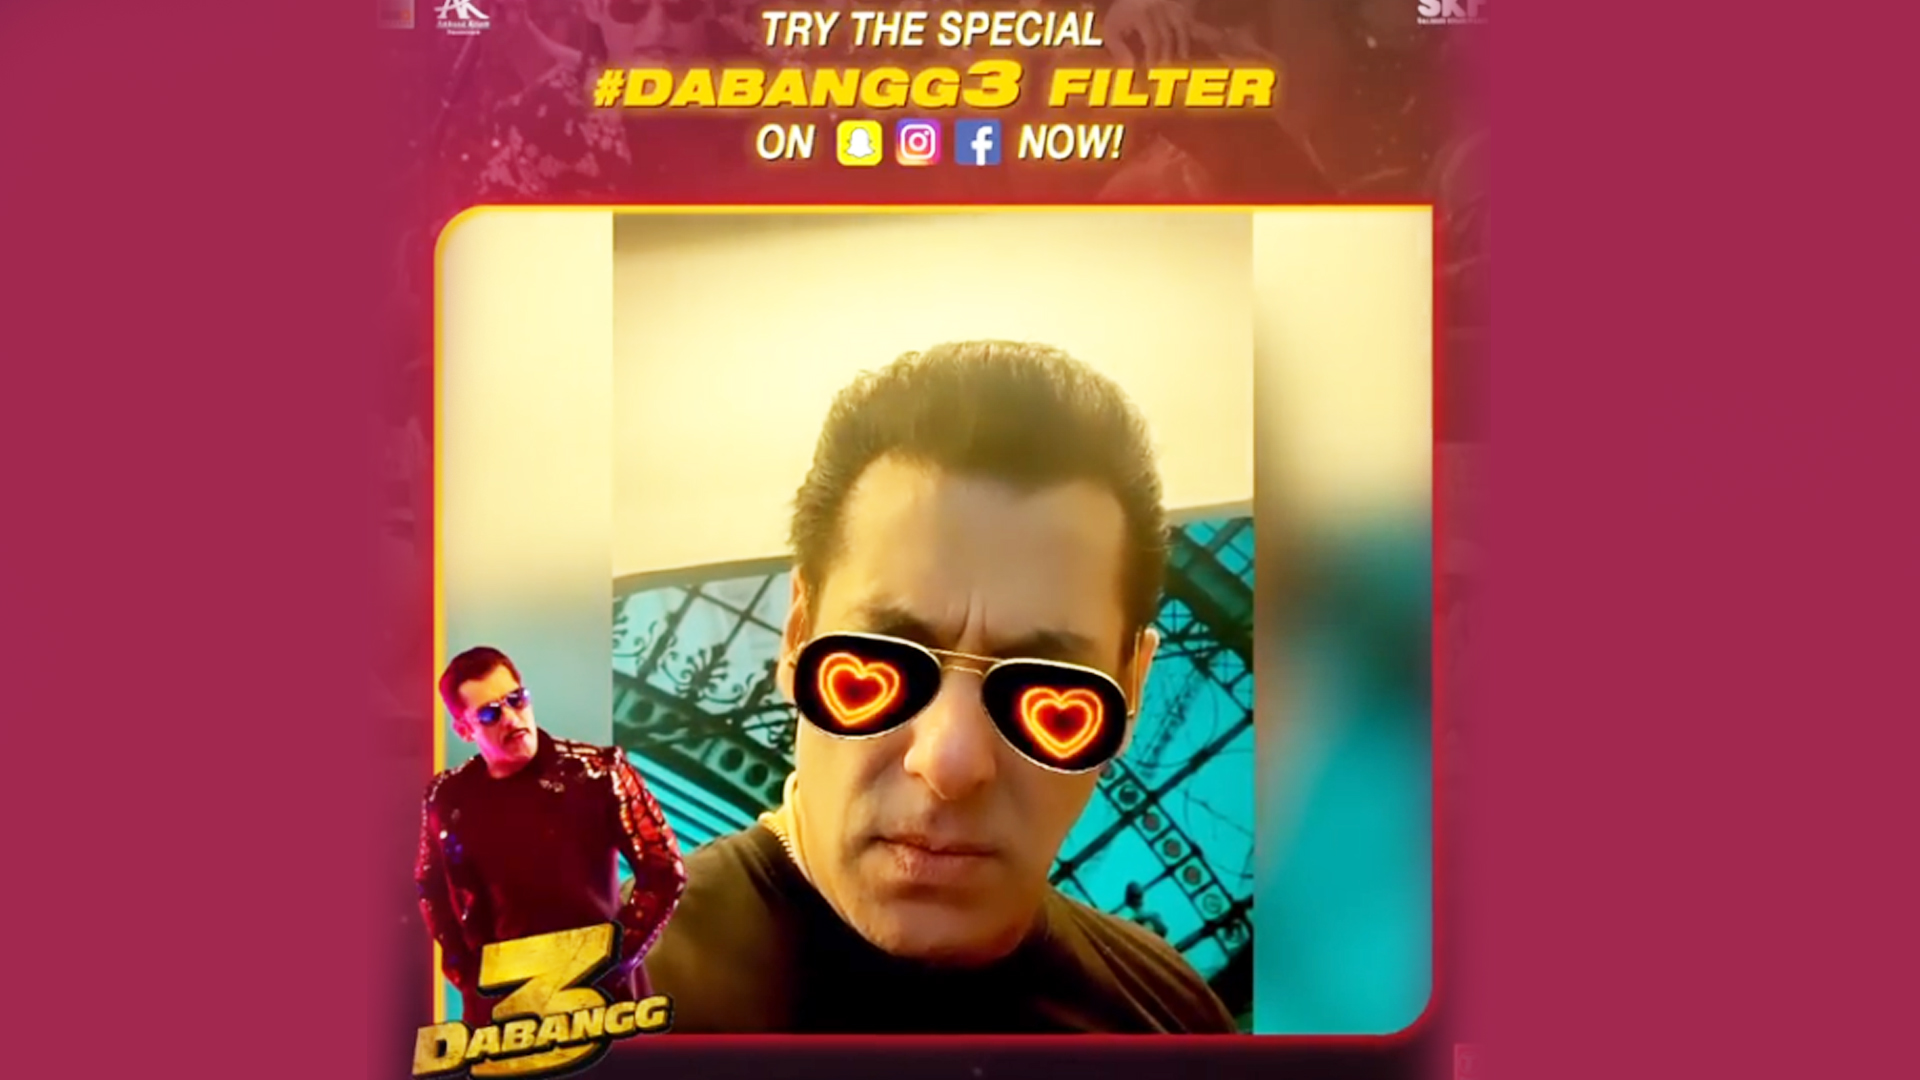 For the 1st time ever, Chulbul Pandey ‘a Filter takes over Facebook, Instagram and Snapchat! Ab Isse Kehte Hain Dabangg Filter Launch